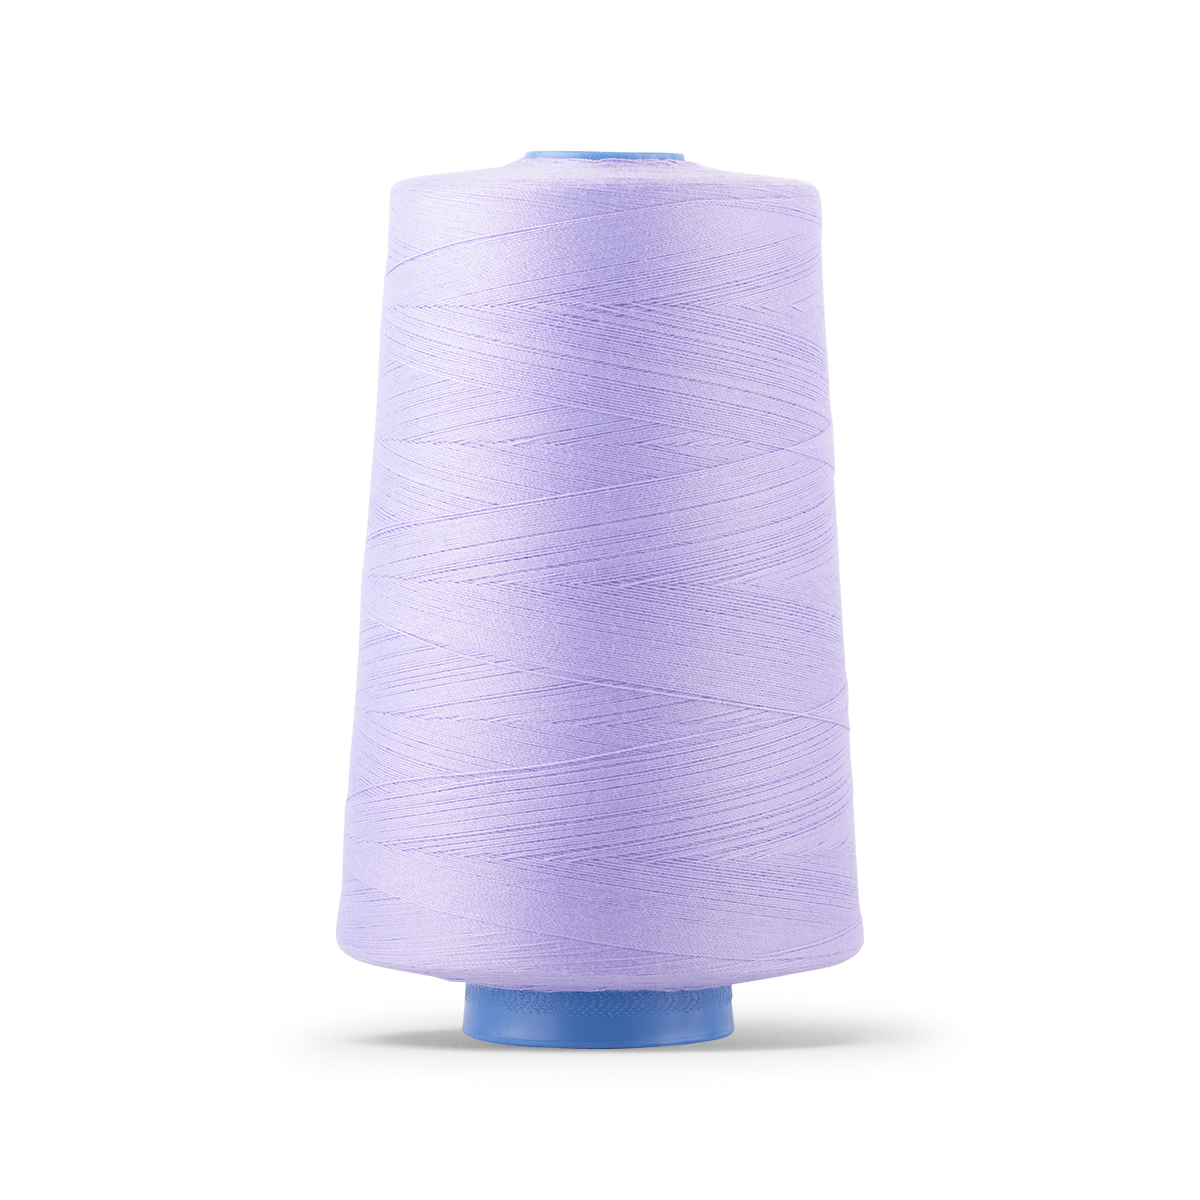  Threadart Polyester Serger Thread - 2750 yds 40/2 - Sea Foam -  56 Colors Available - 4 Cone Bundle Pack